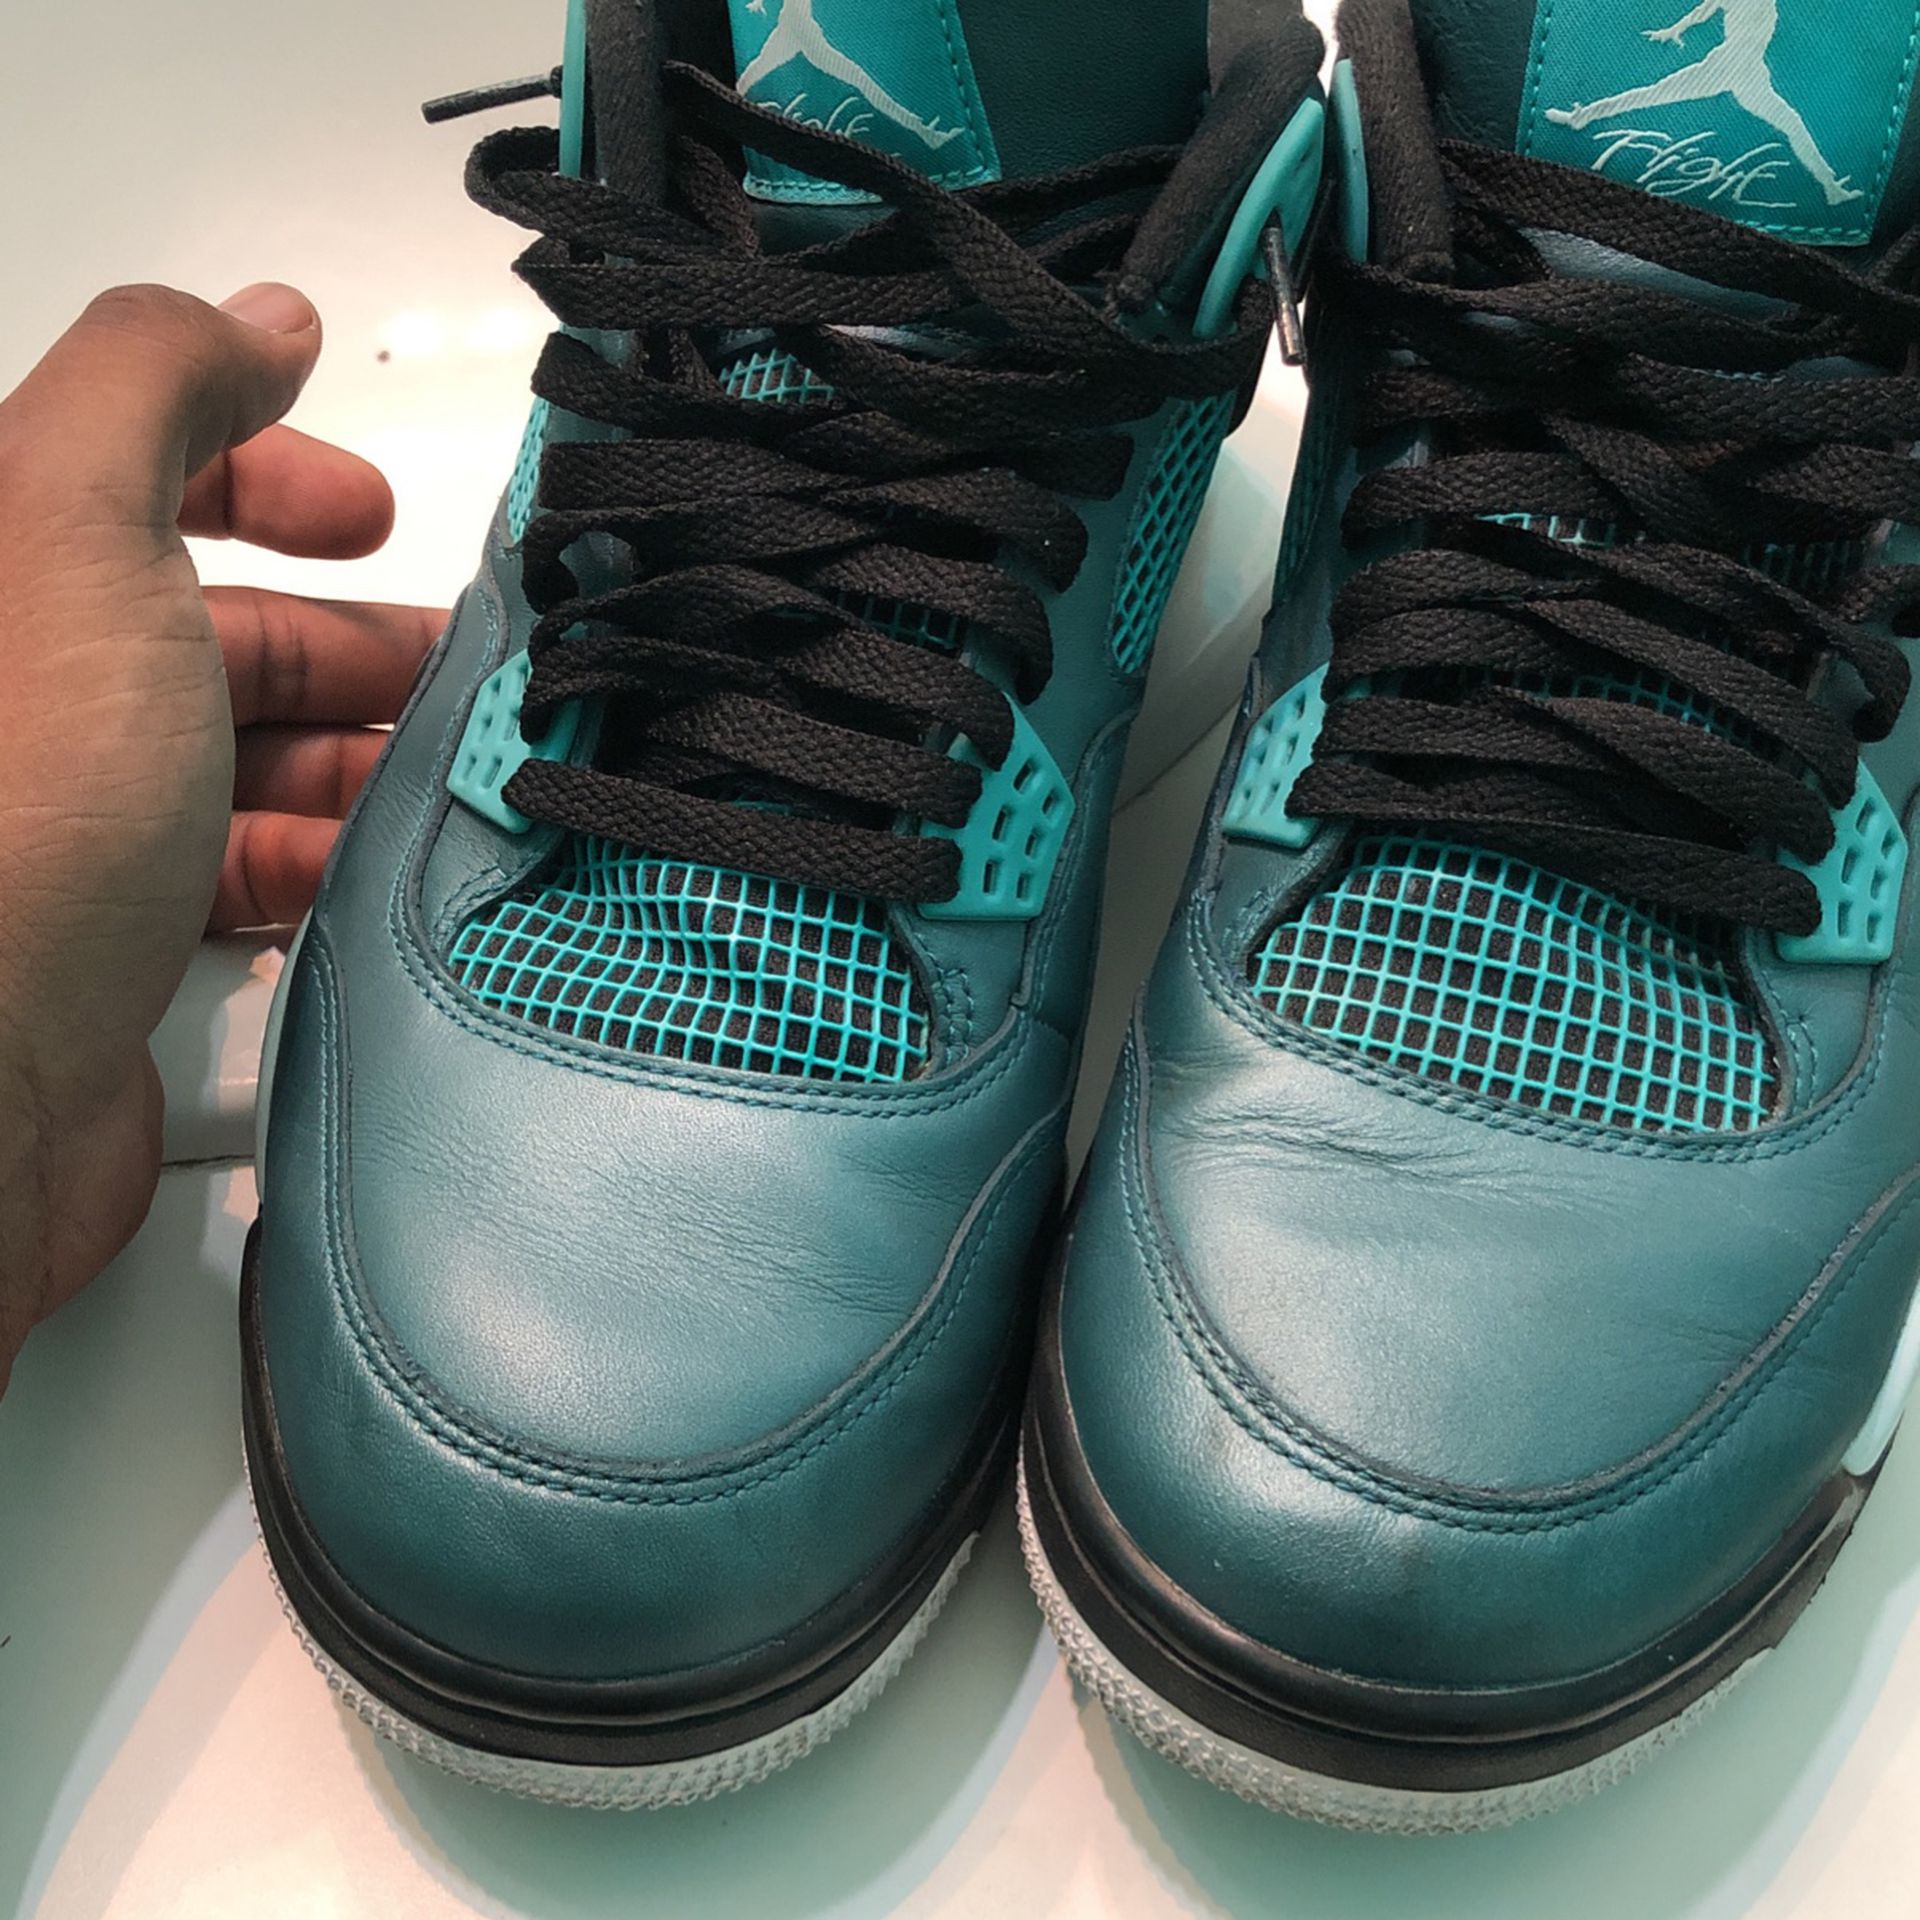 Teal 4s 